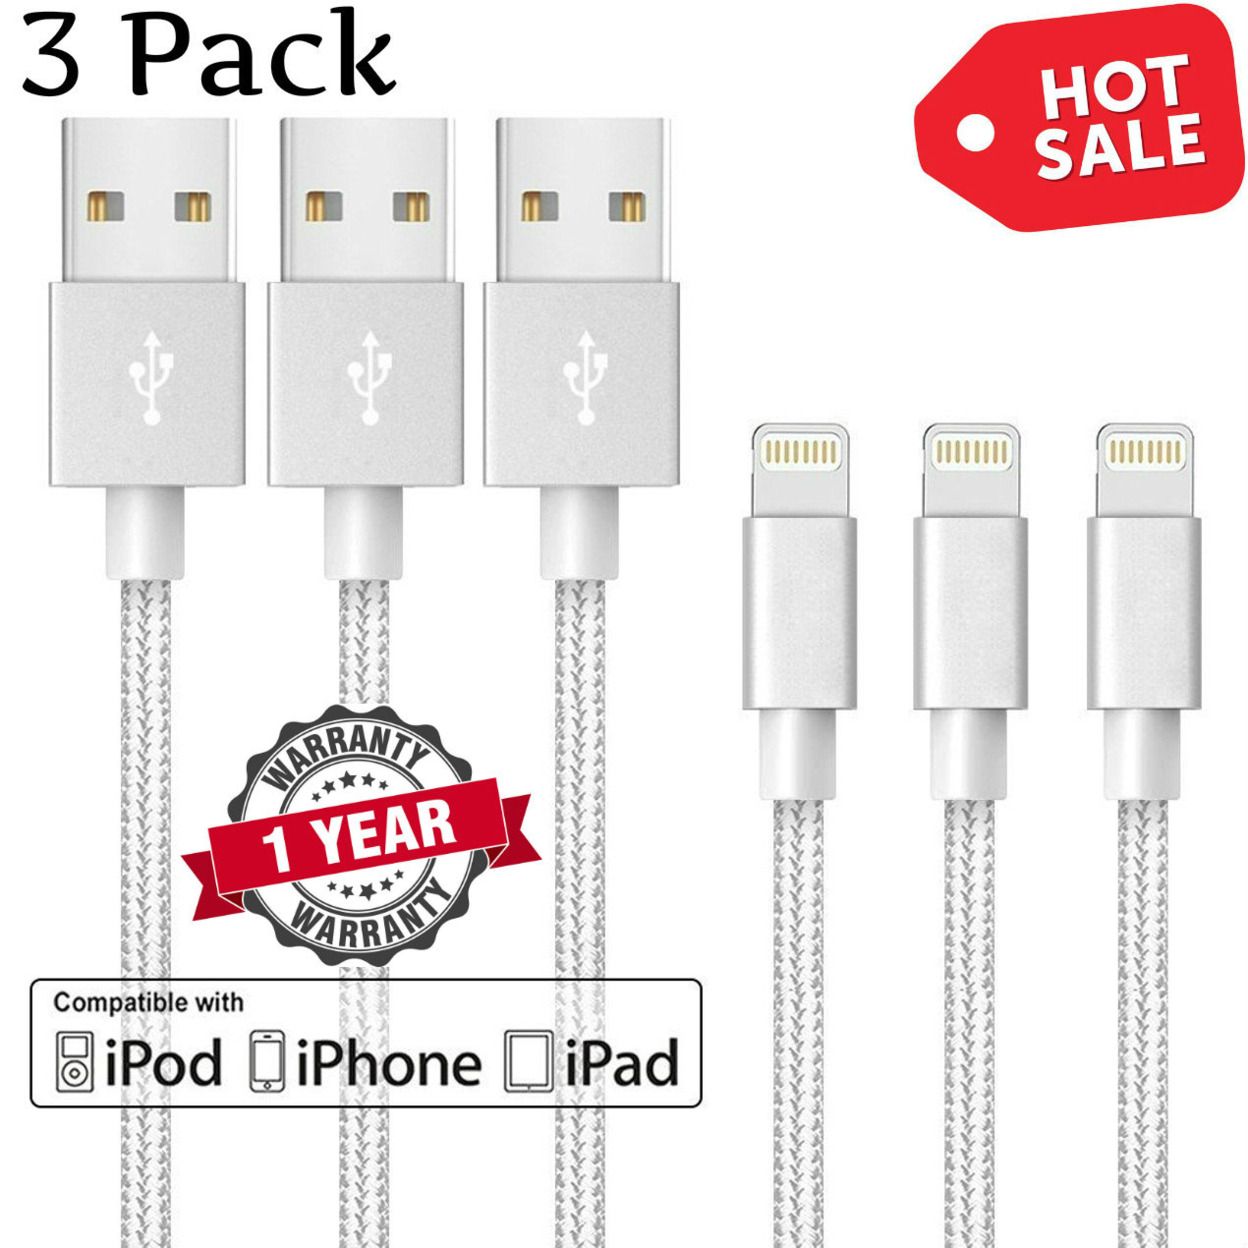 6 FT Heavy Duty Braided 8 Pin USB Charger Cable Cord For Apple IPhone - White, 3